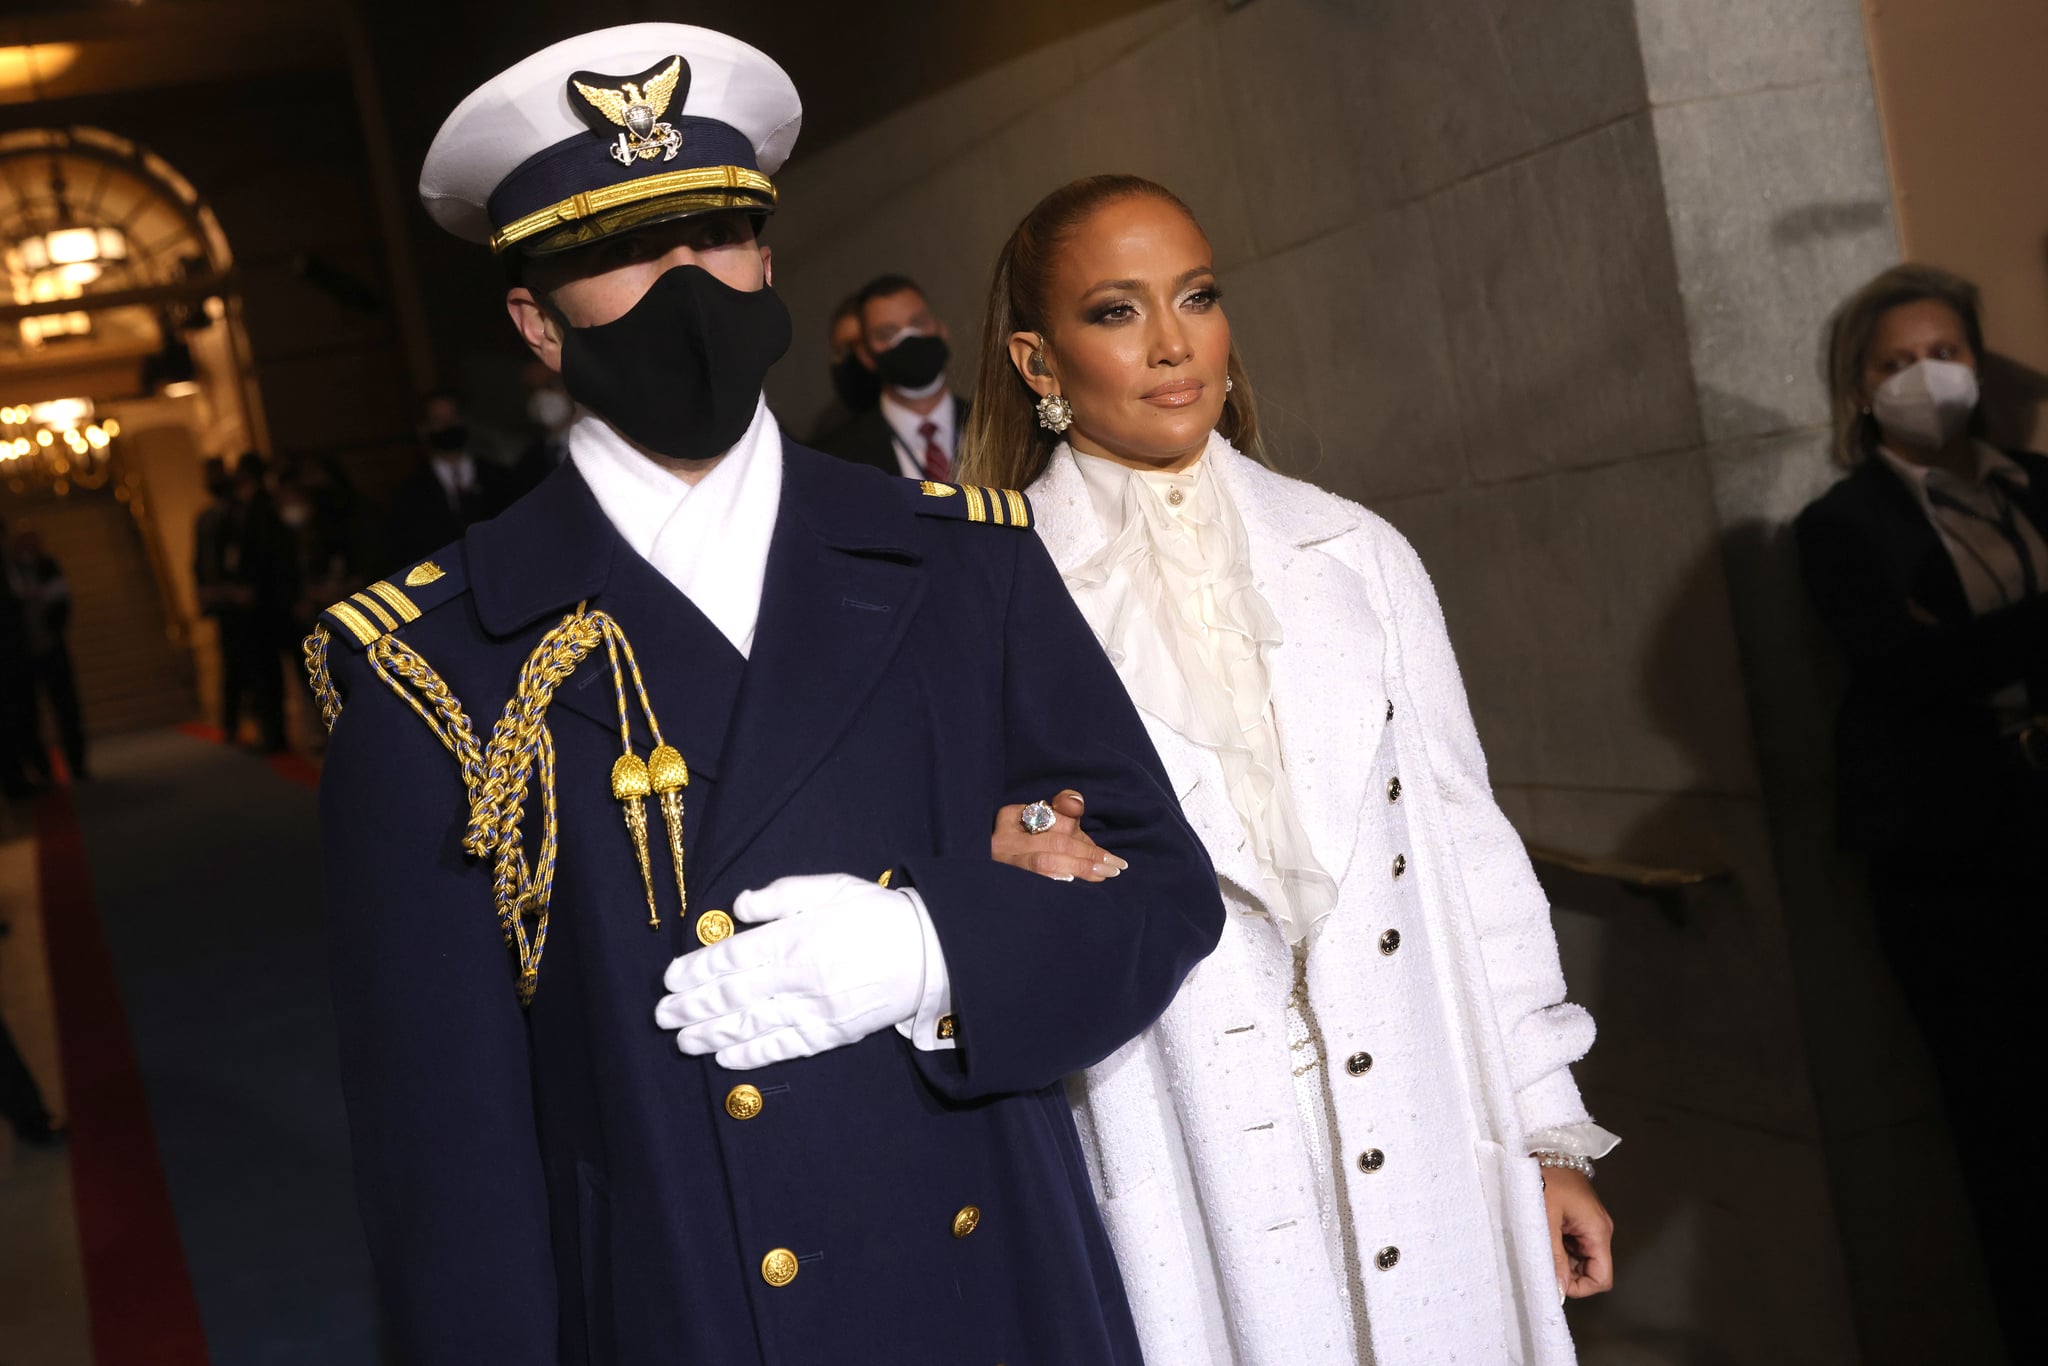 WASHINGTON, DC - JANUARY 20: Jennifer Lopez is escorted to  the inauguration of U.S. President-elect Joe Biden on the West Front of the U.S. Capitol on January 20, 2021 in Washington, DC.  During today's inauguration ceremony Joe Biden becomes the 46th president of the United States. (Photo by Win McNamee/Getty Images)